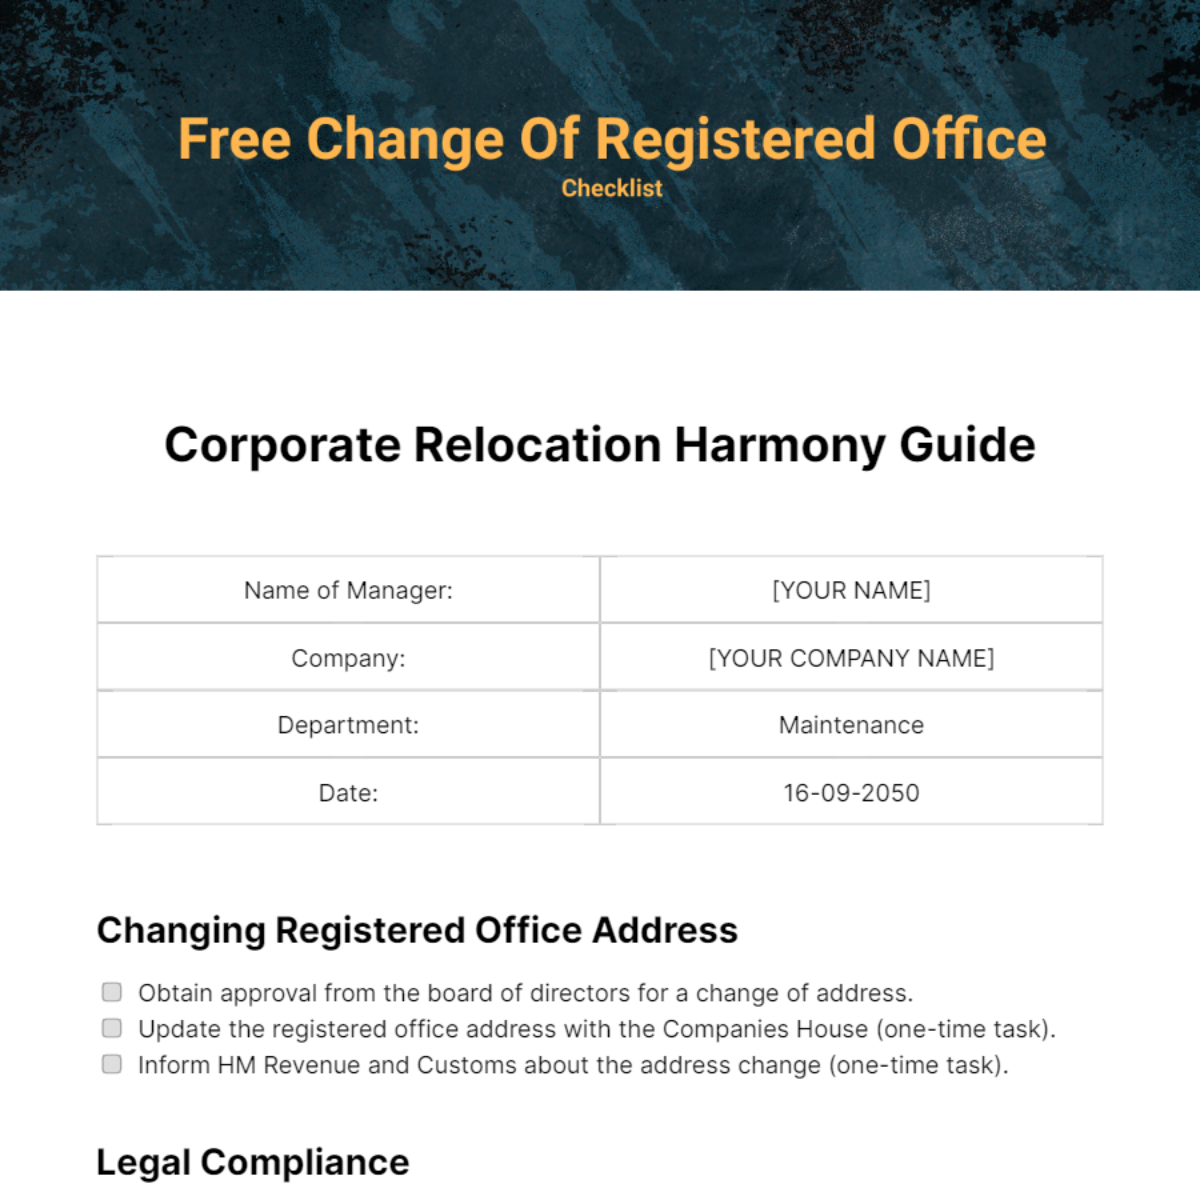 Change of Registered Office Checklist Template